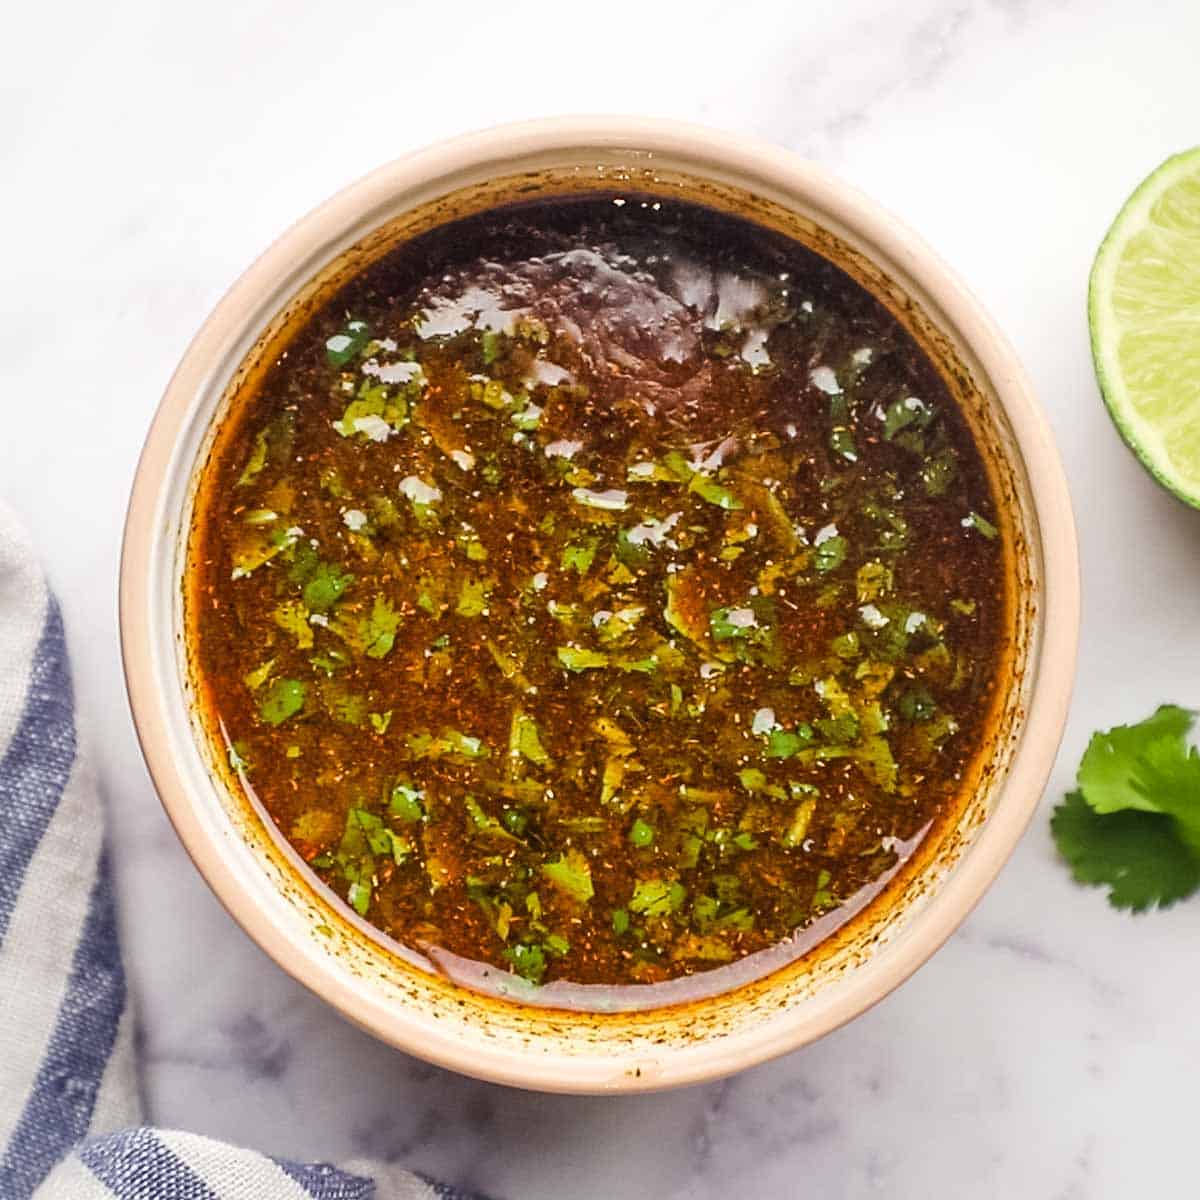 A bowl of dressing with chili powder and cilantro.